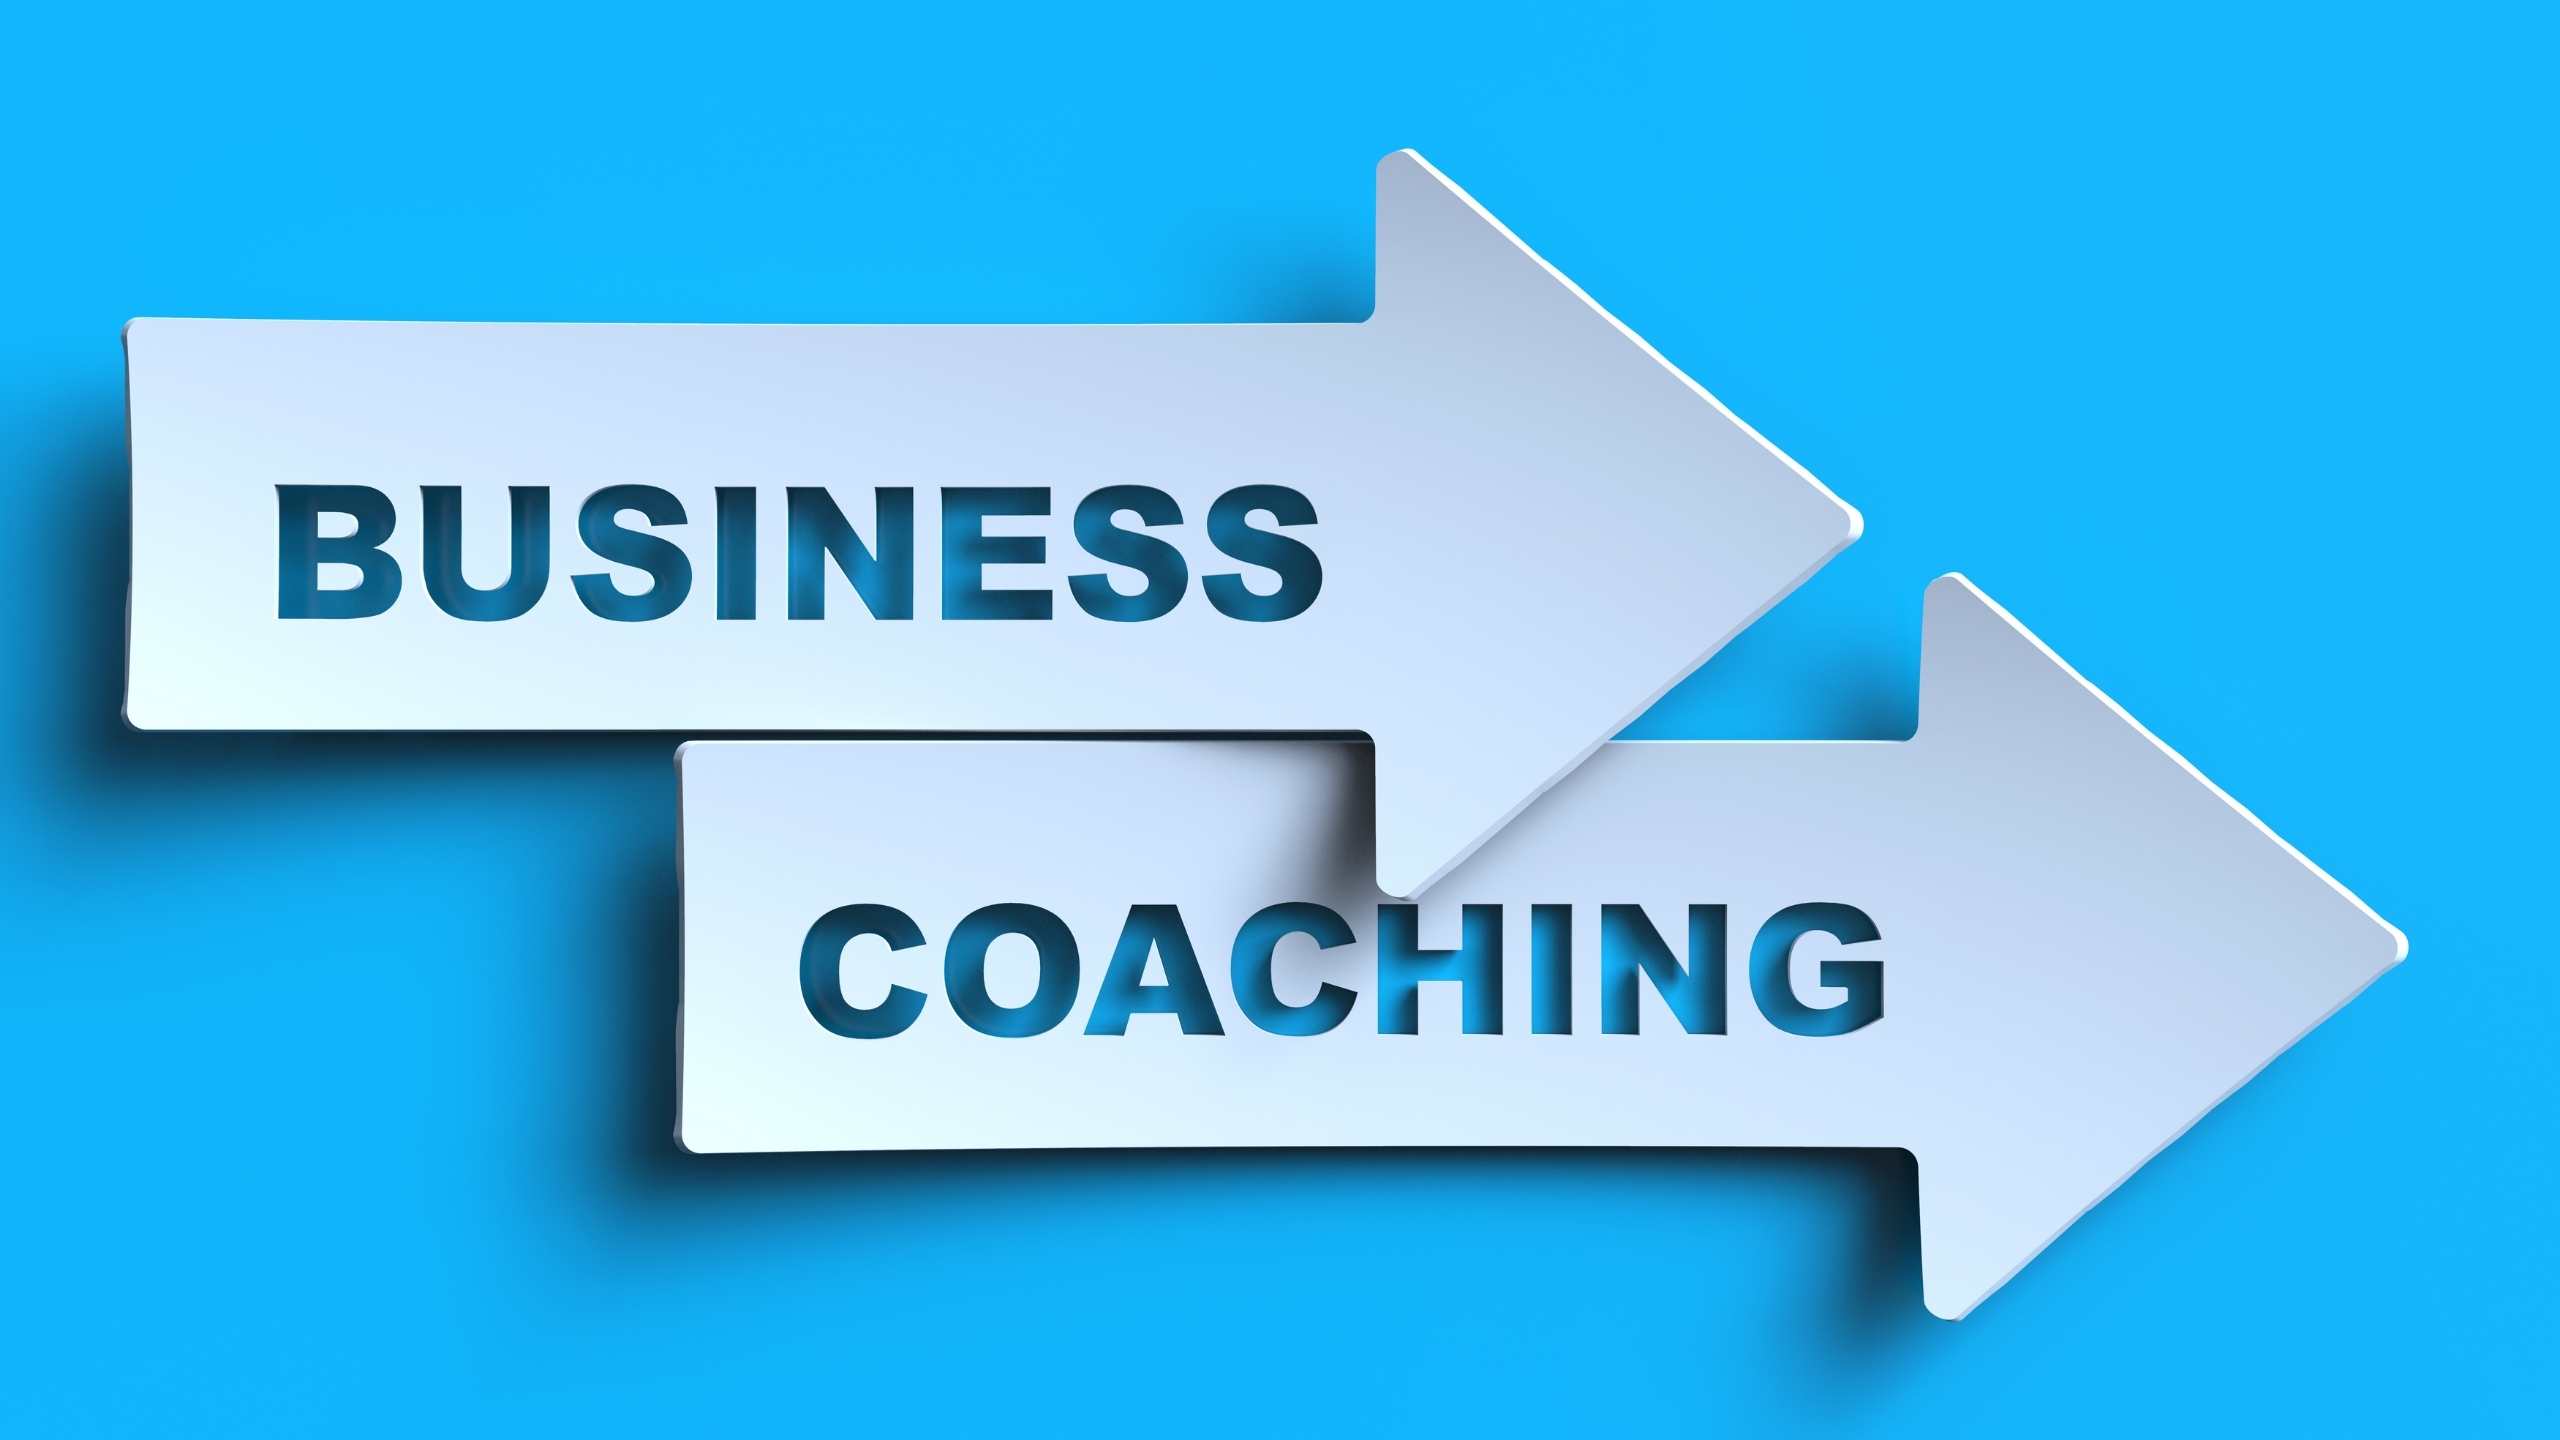 Business Coach Near Me: A Personal Experience